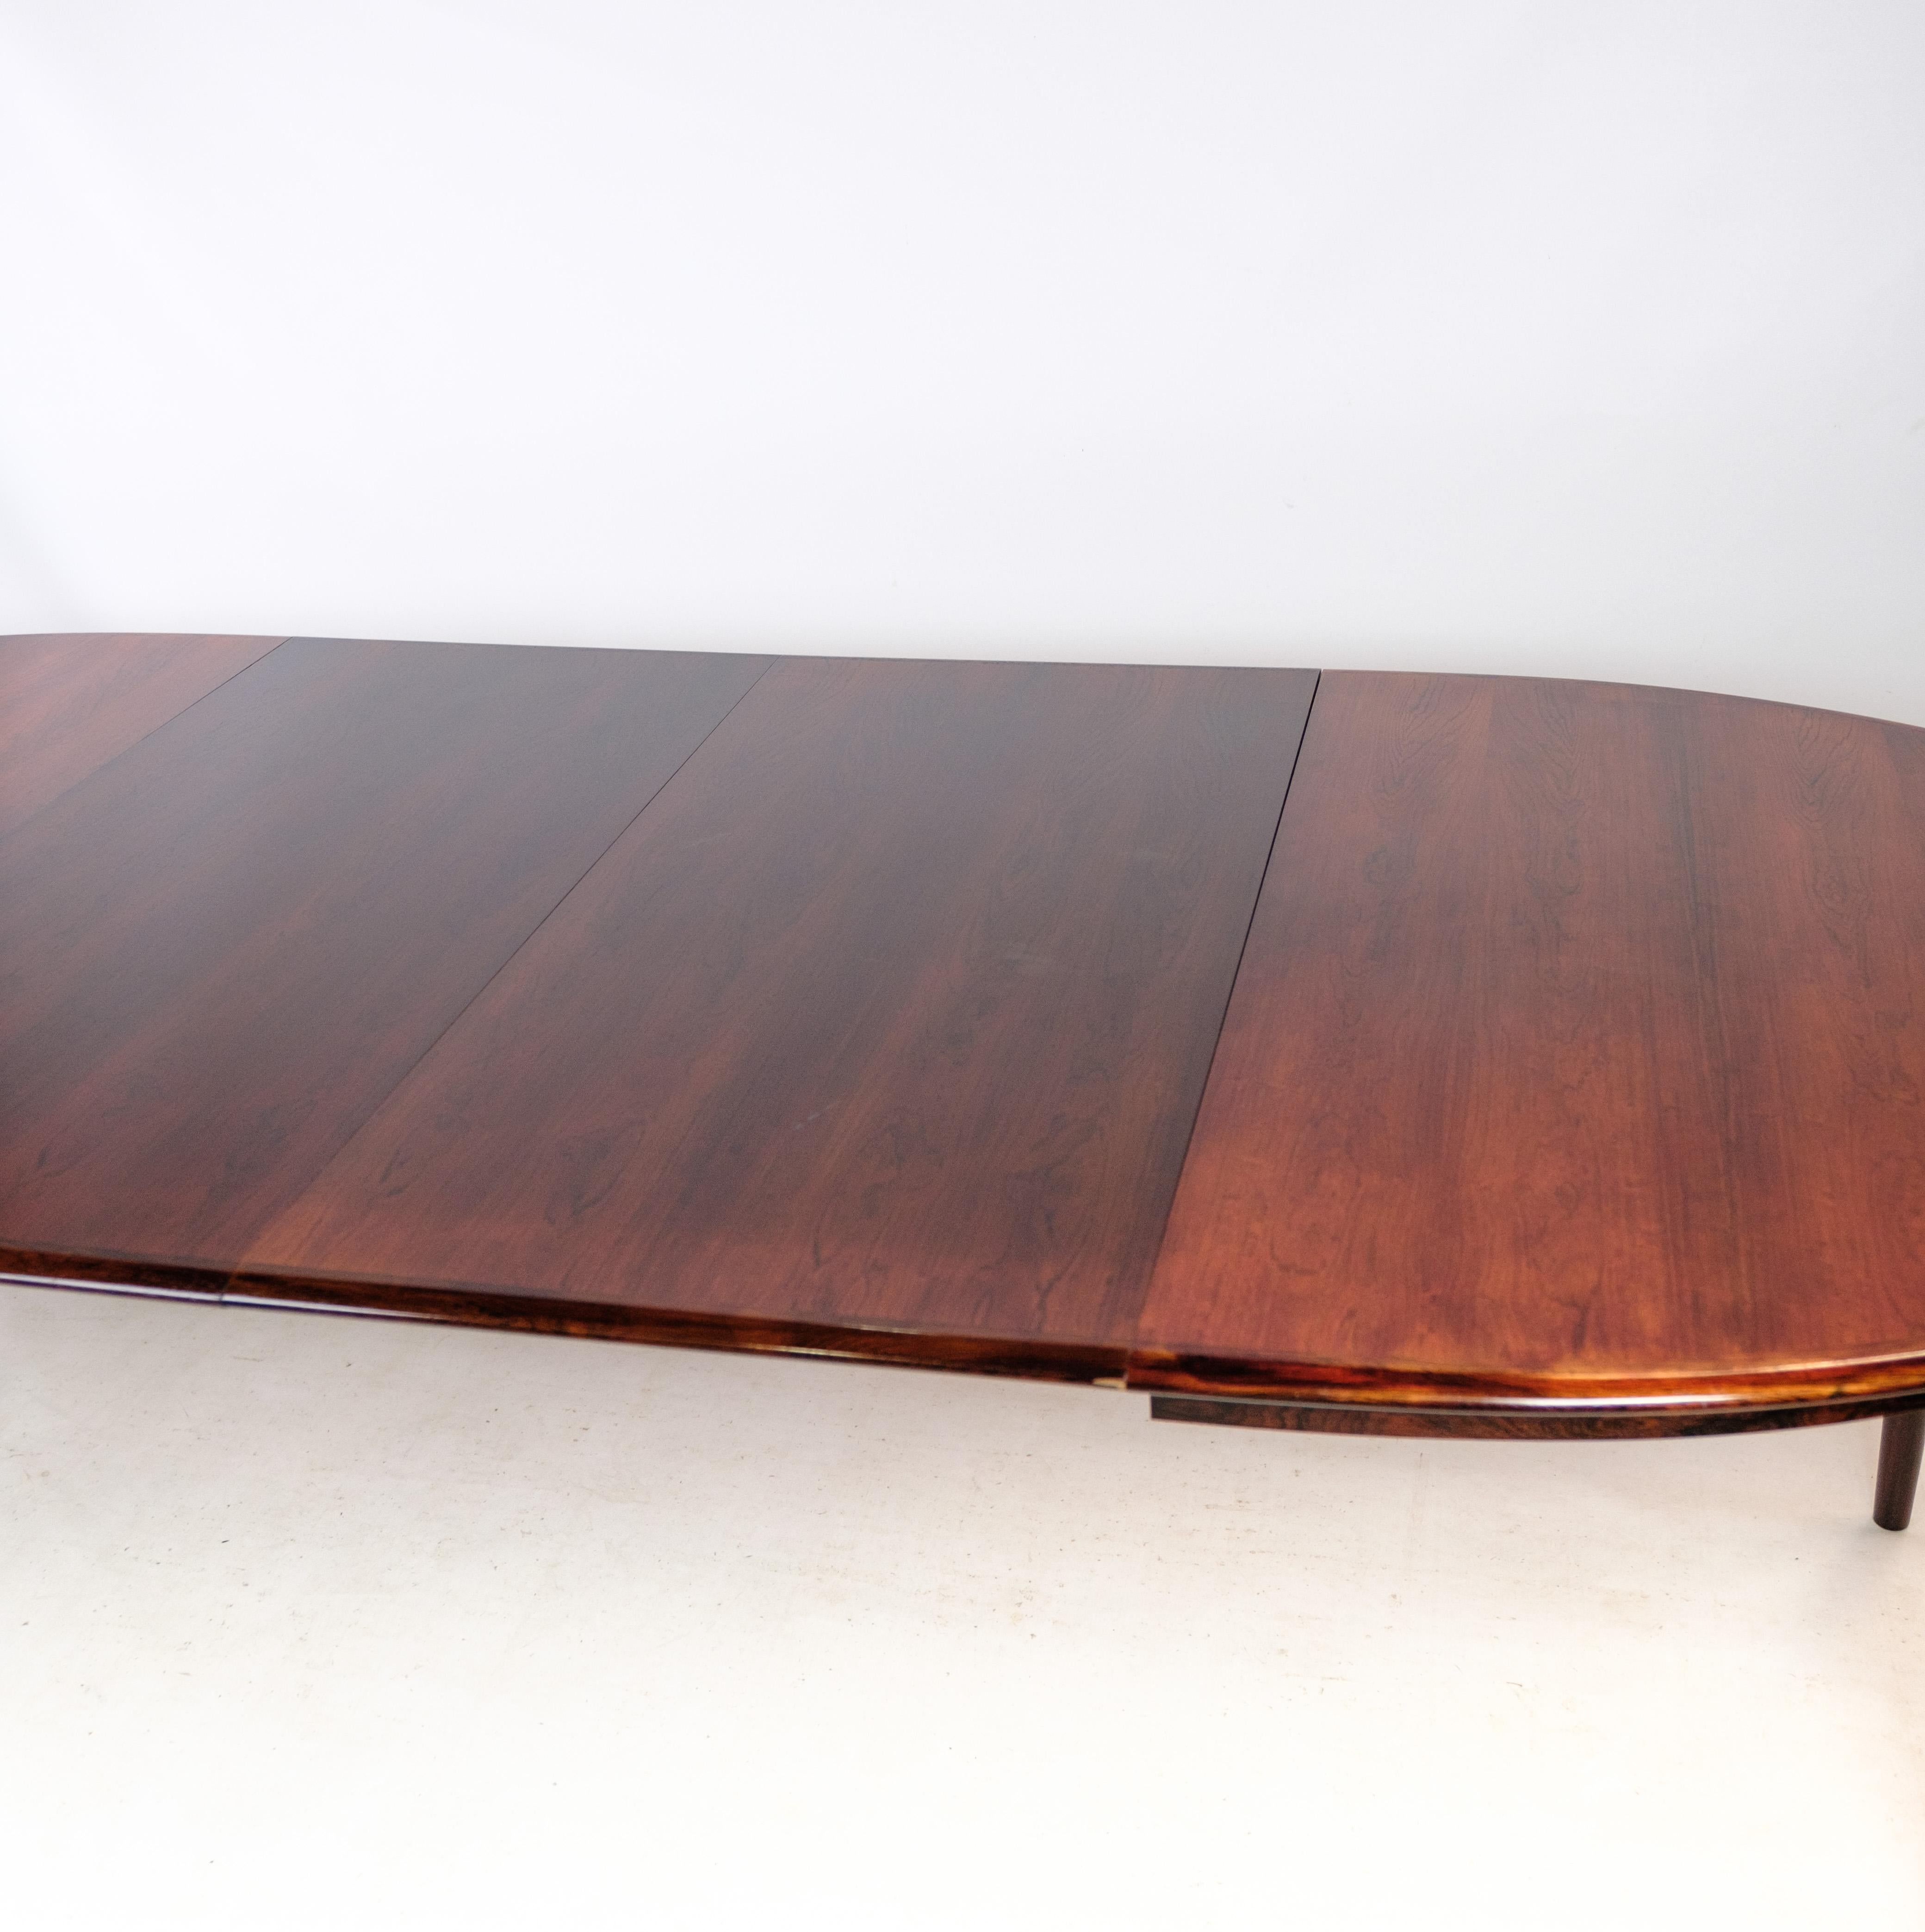 This oval dining table, designed by the acclaimed Arne Vodder, epitomizes the elegance and sophistication of mid-century Danish design. Crafted from rosewood and dating back to around the 1960s, this table is a timeless piece that adds a touch of